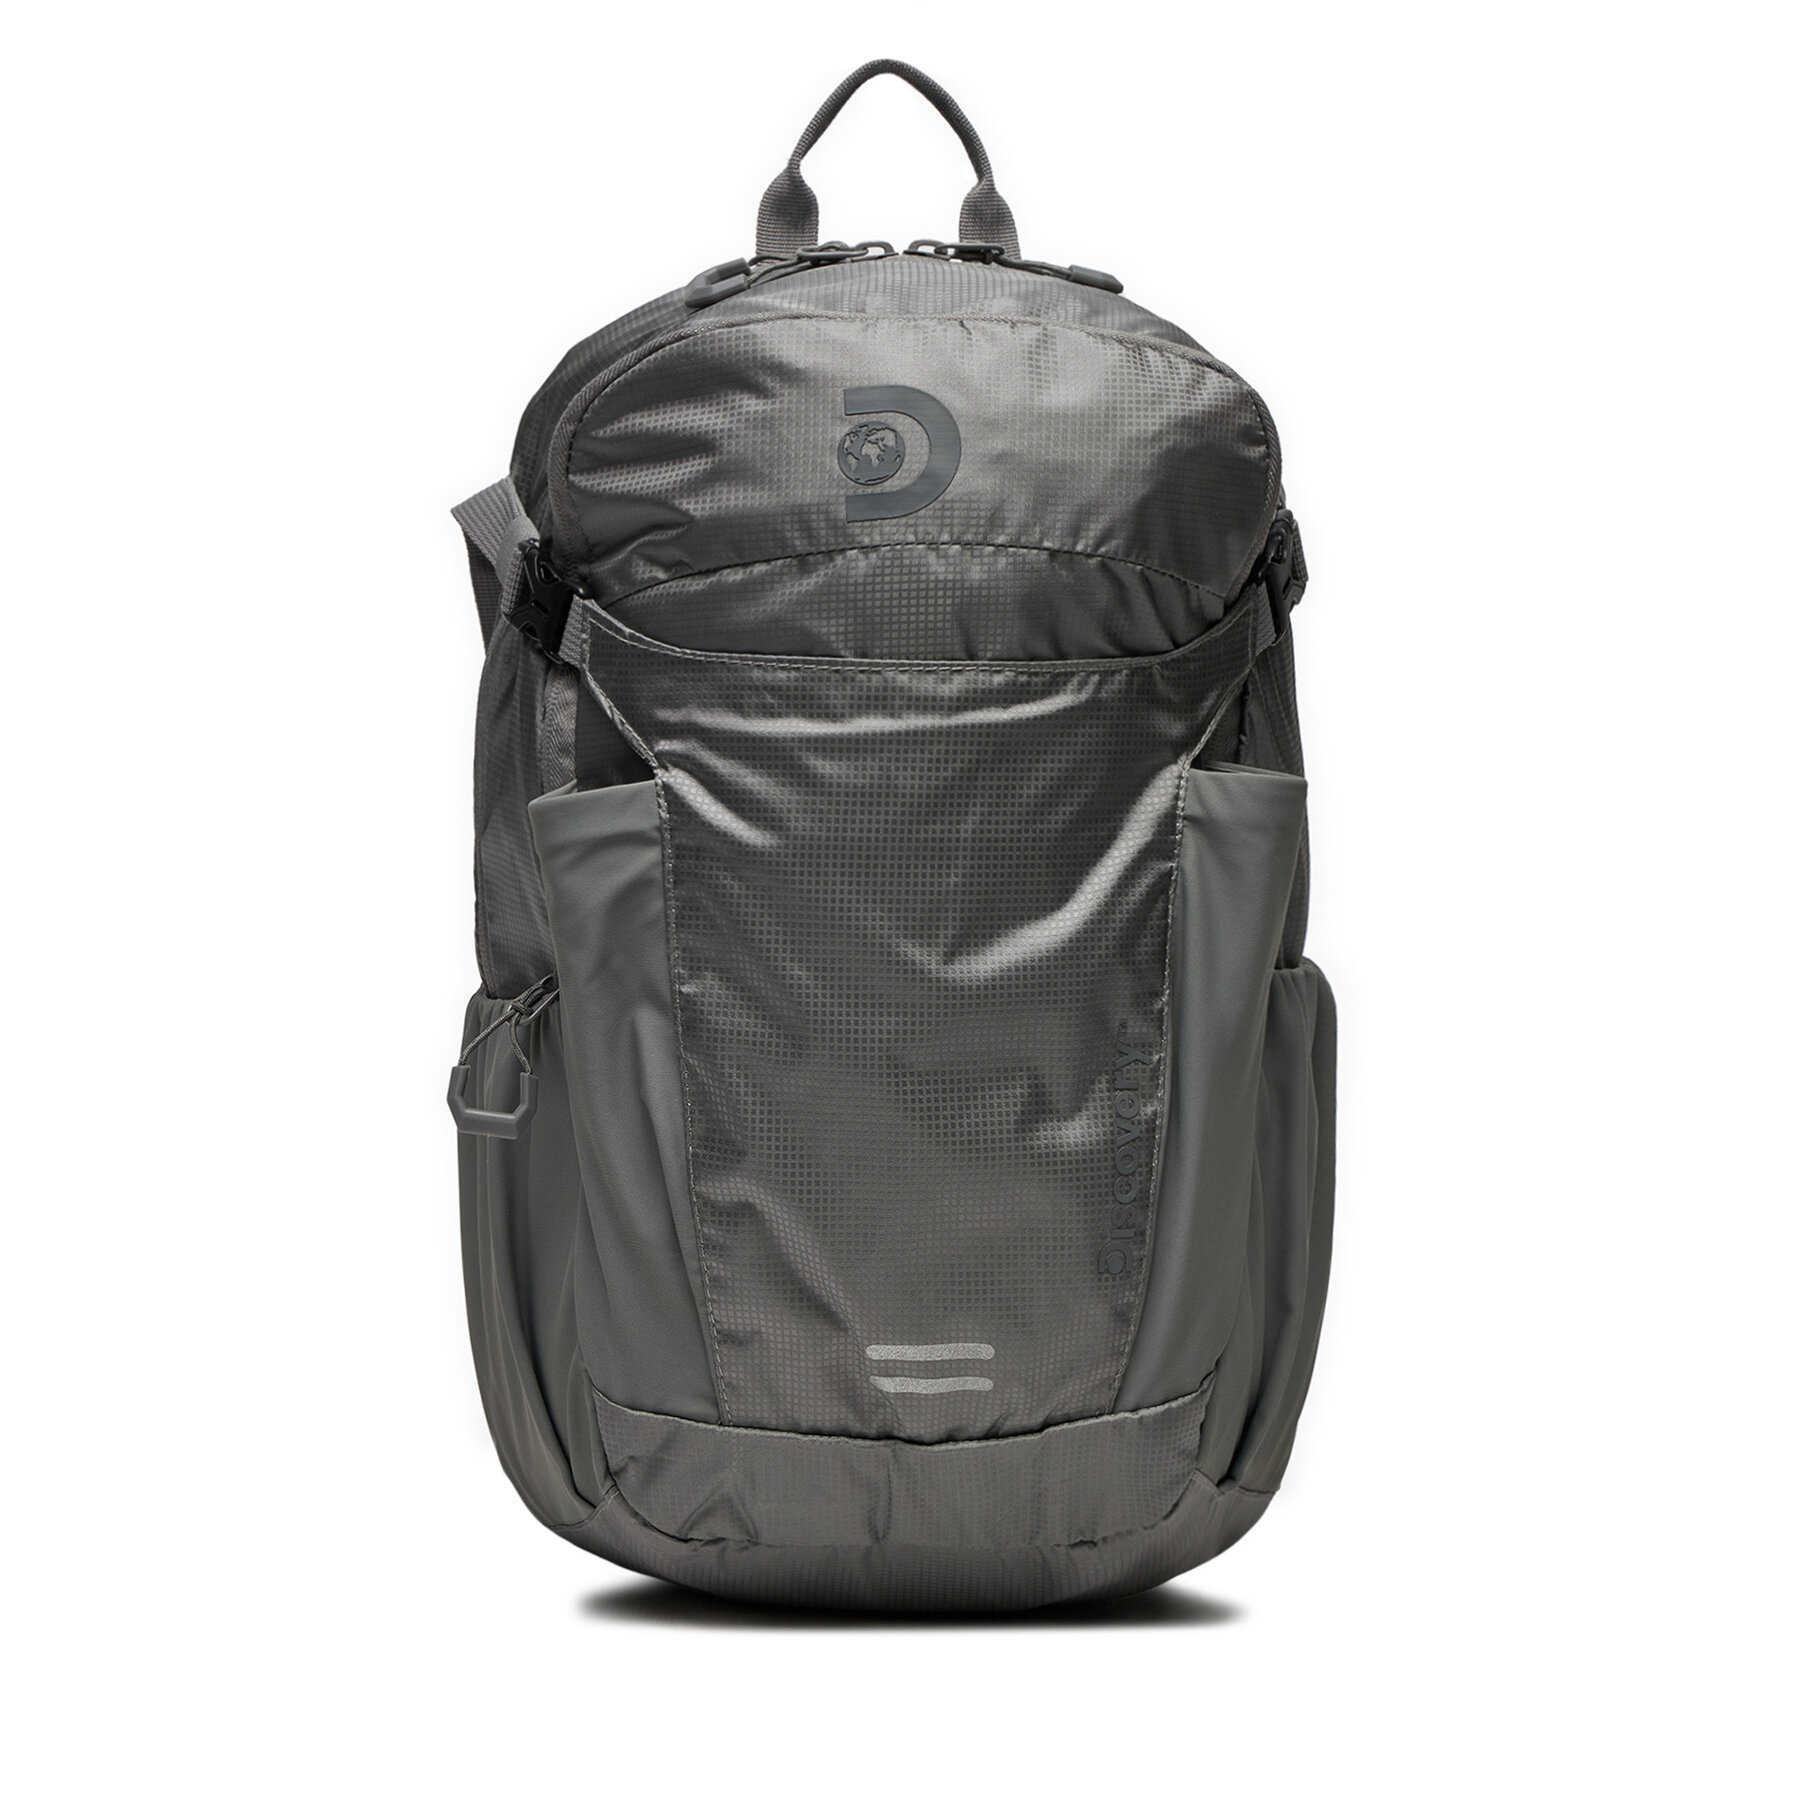 Rucksack Discovery Outdoor Backpack D01113.22 Grau von Discovery